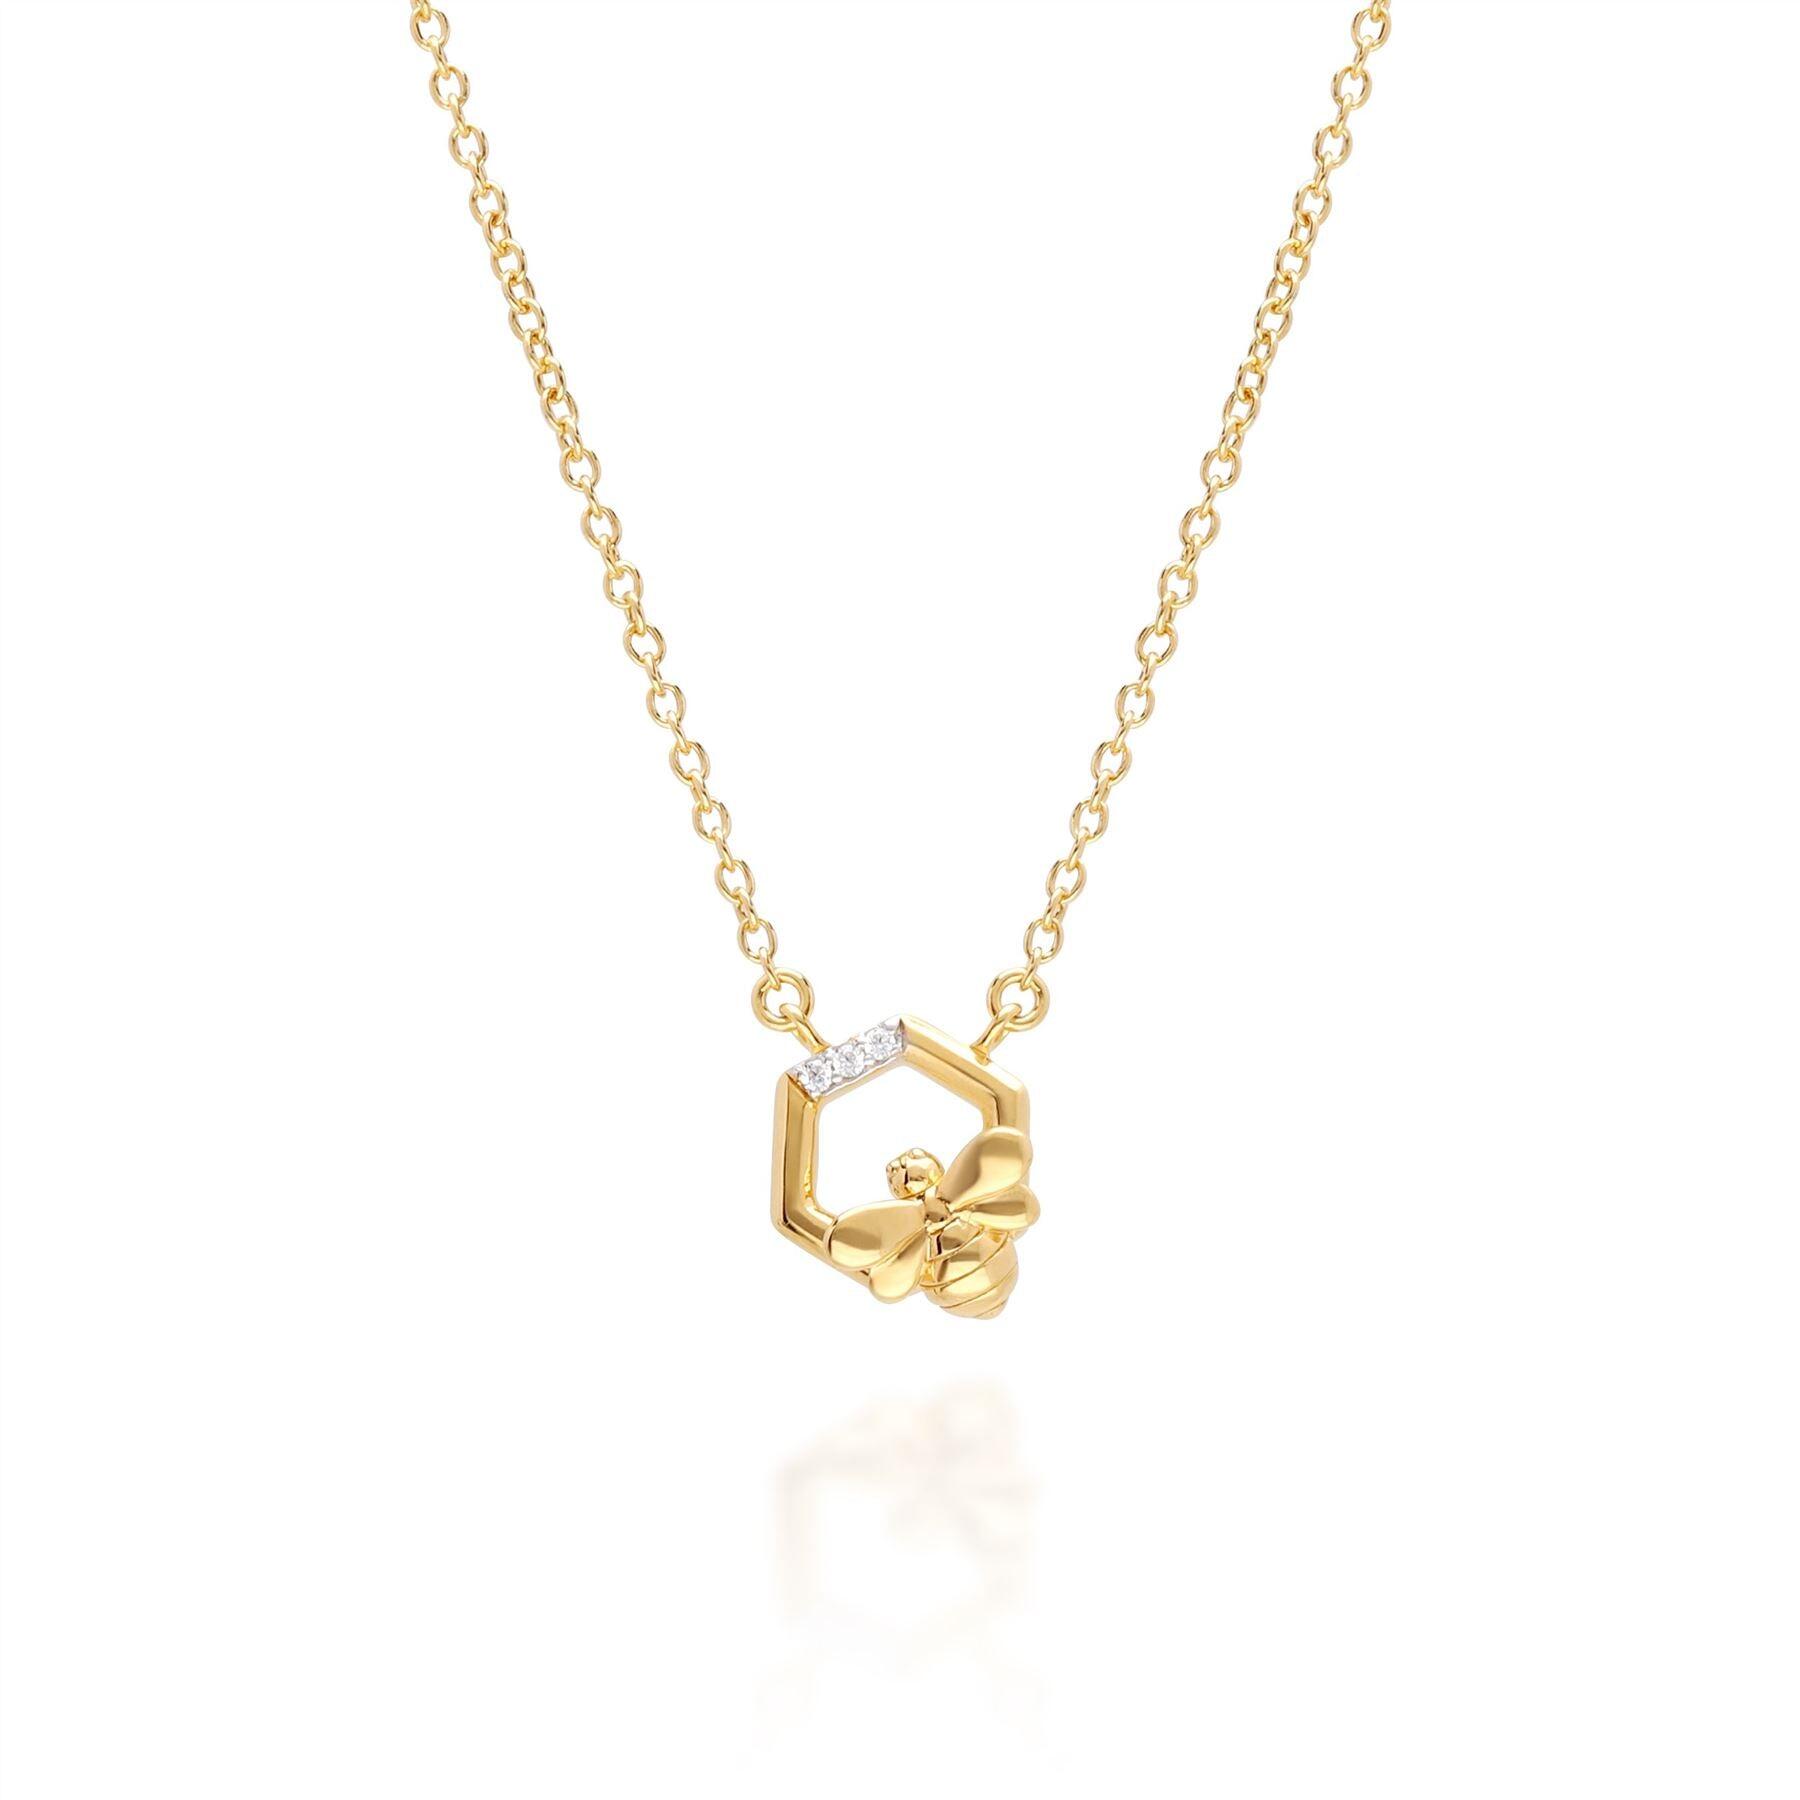 Honeycomb Inspired Hexagon Bee Necklace in 9ct Yellow Gold